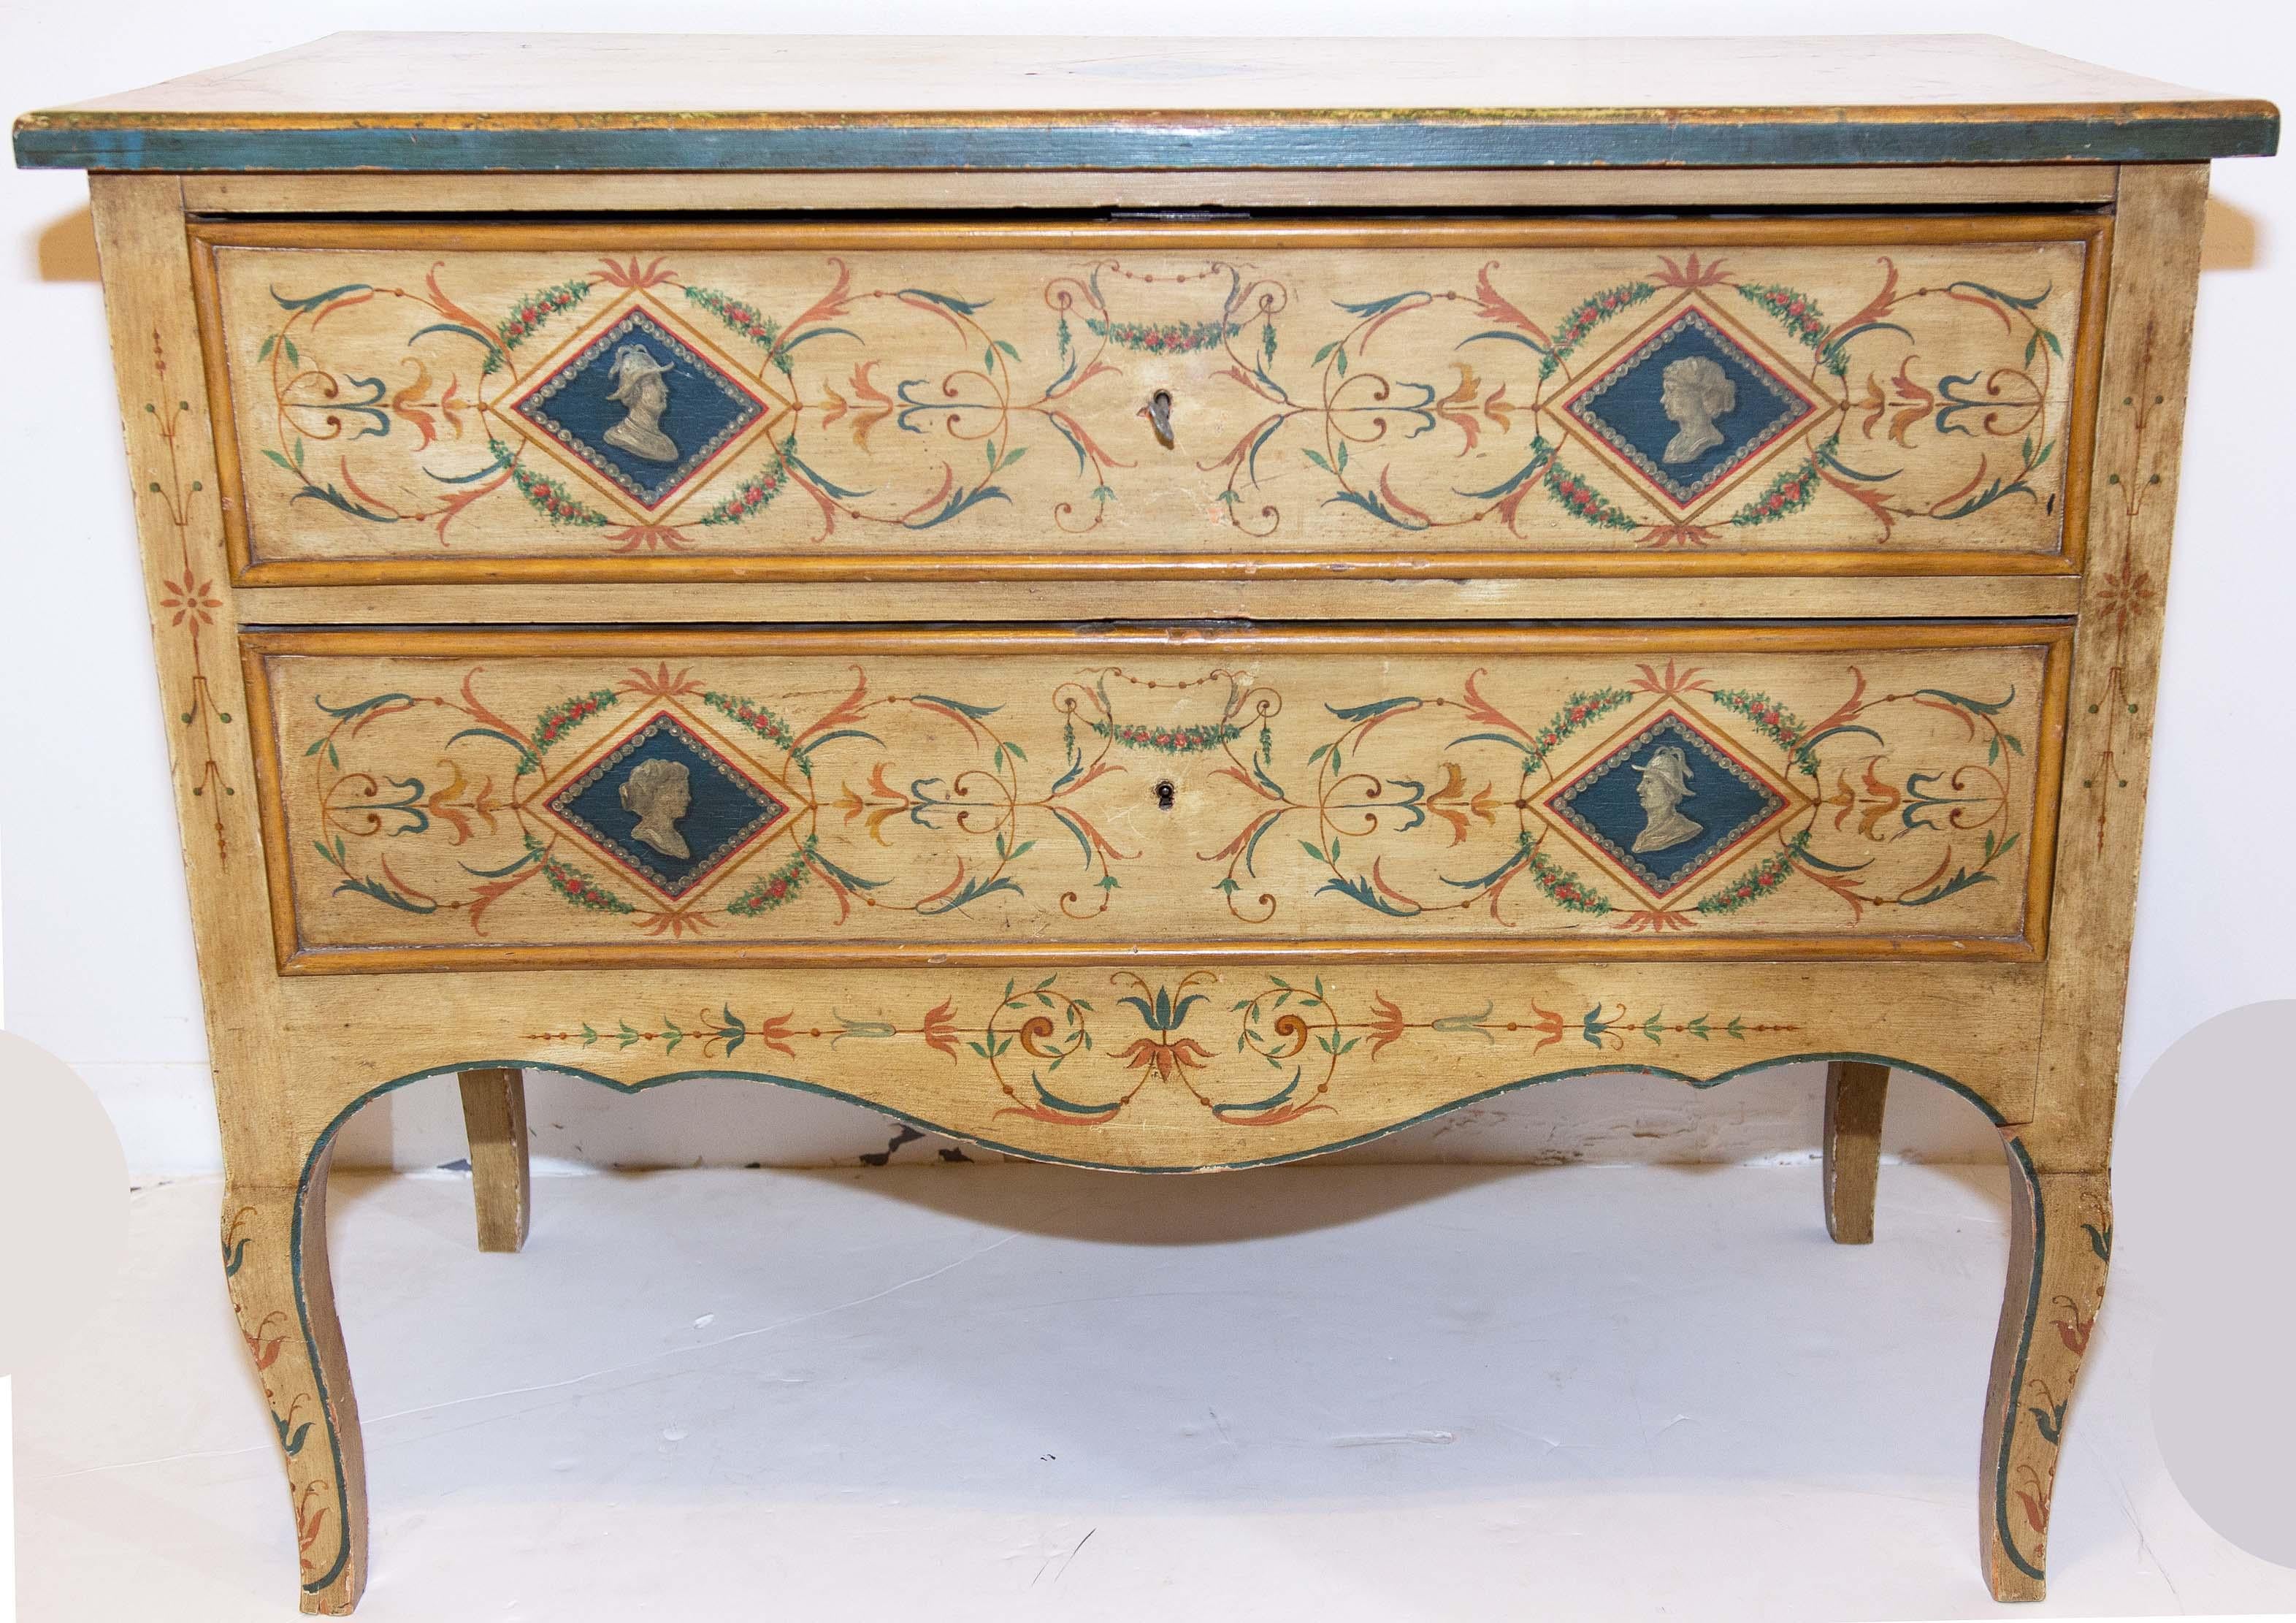 19th century painted two-drawer commode. Original painted surfaces. Wonderful color and a great size.
   